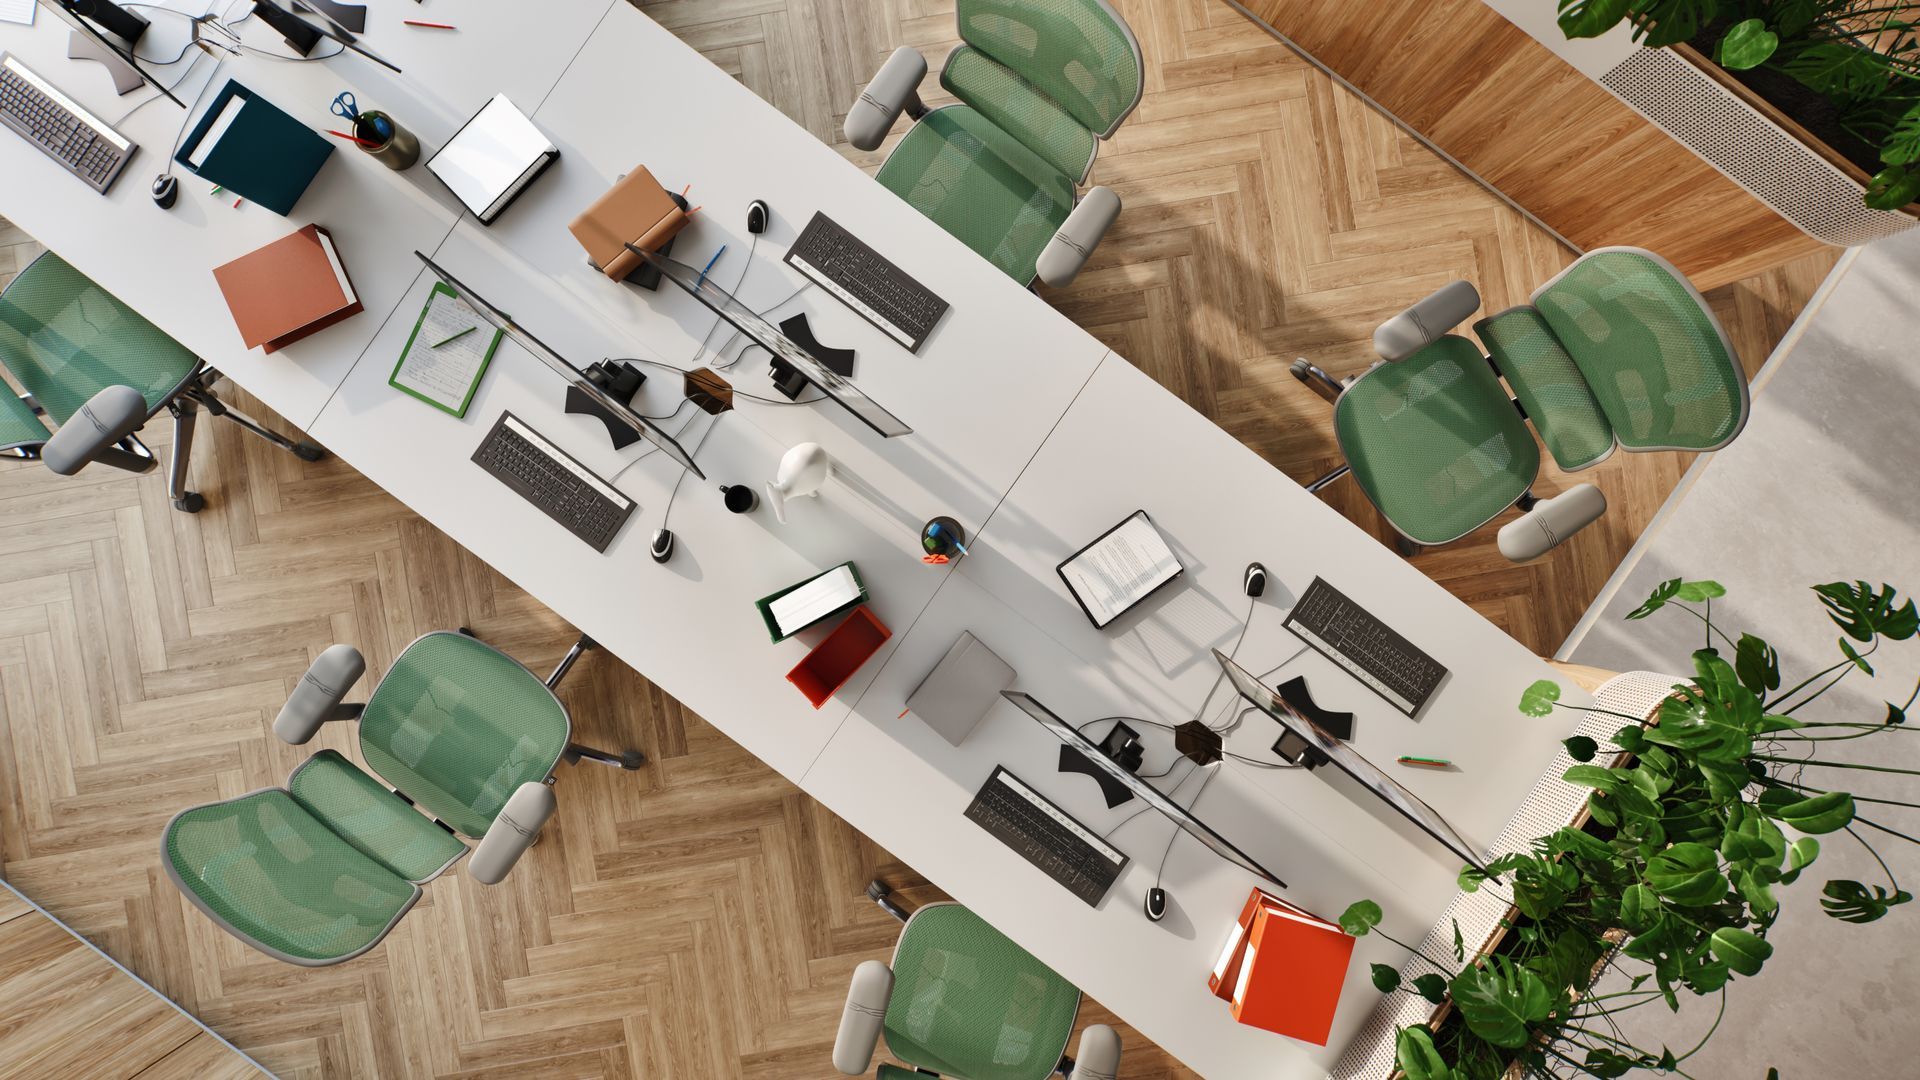 Birdseye view of an office with a white desk in the middle, with six chairs at each section of the large desk. The chairs are green mesh Ergohuman office chairs in a grey frame. At each desk is a computer, keyboard, notebooks, and some books. The floor is wooden herringbone. The office is adorned with green plants. 